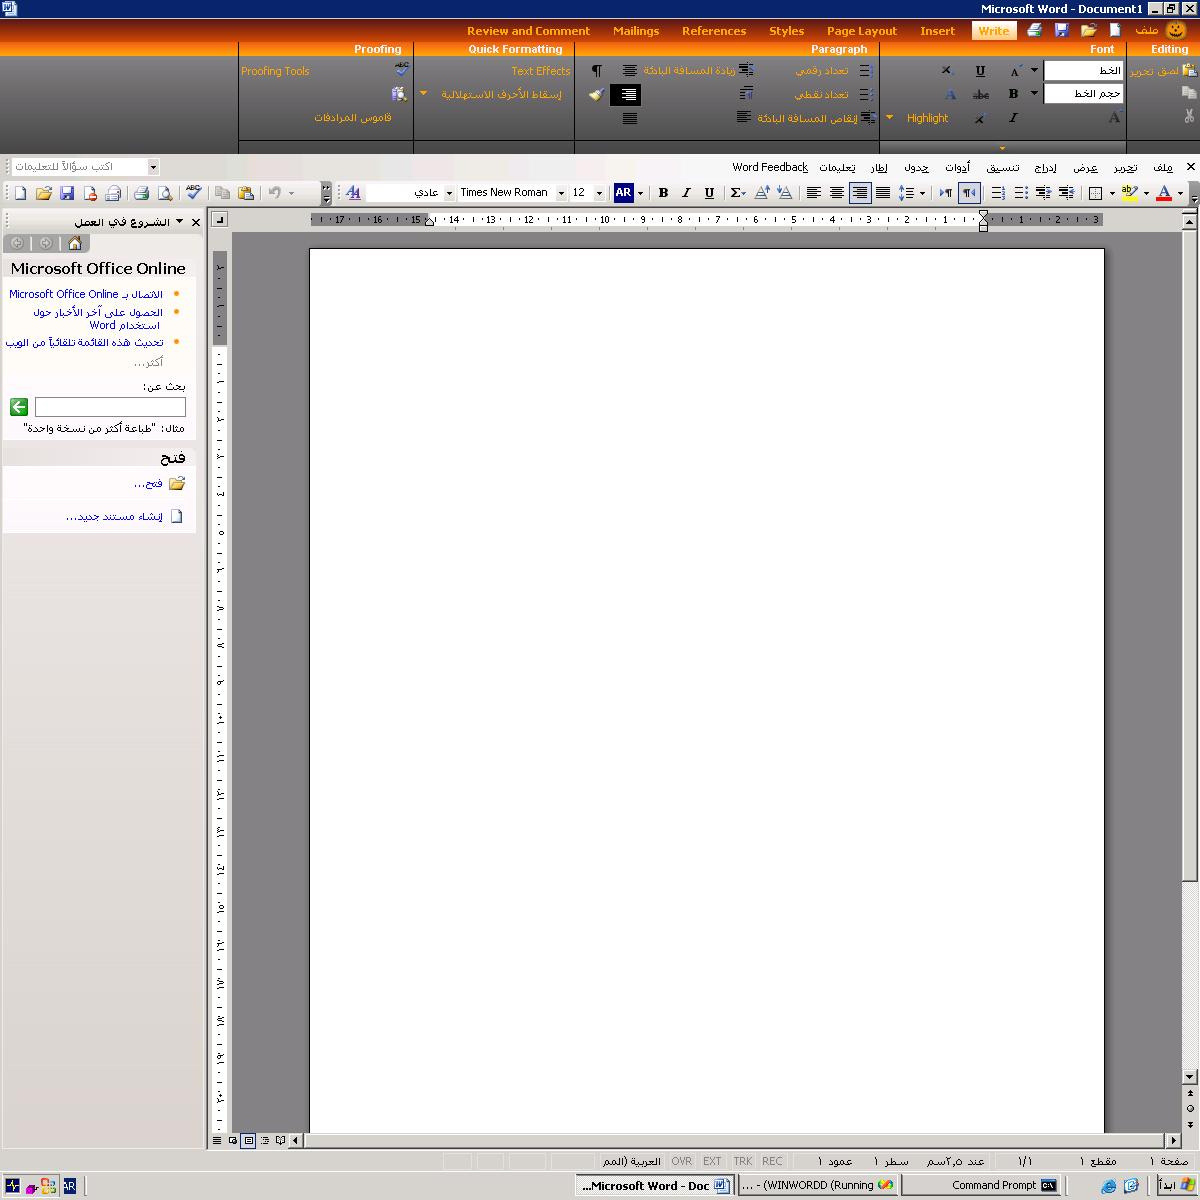 Early build of Office12 with the Ribbon going right to left and text in Arabic, also help is on the left side of the screen